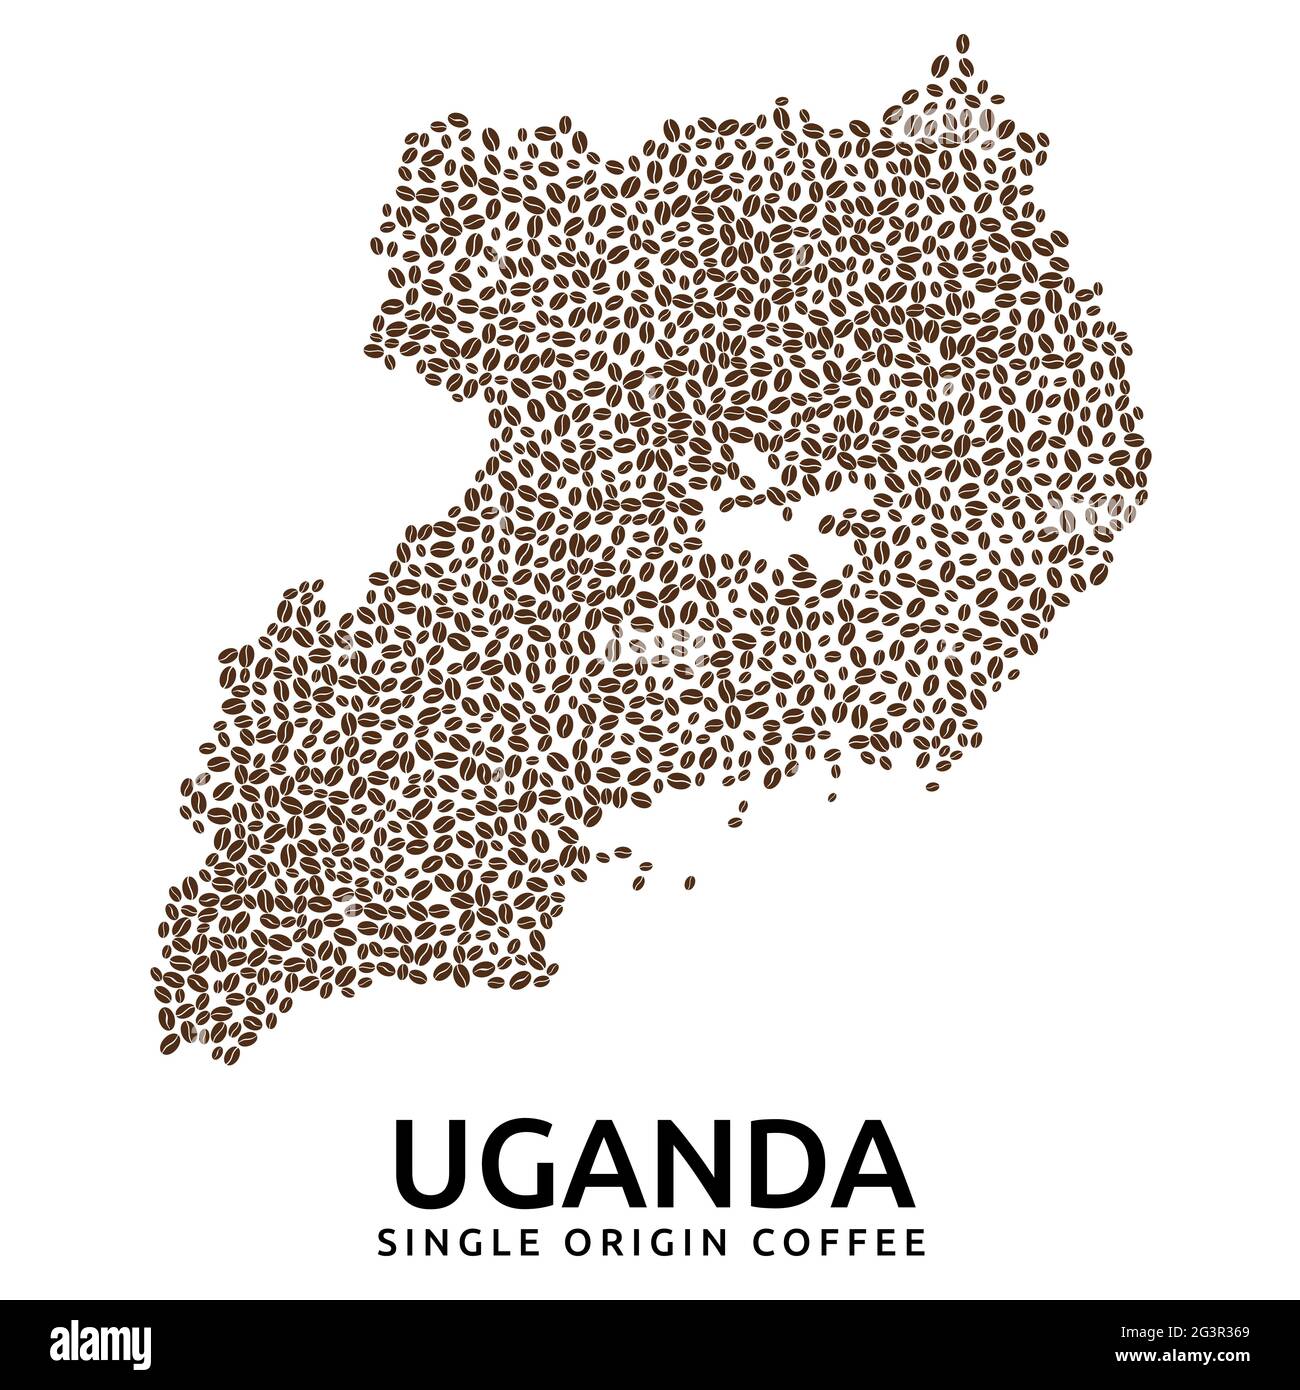 Shape of Uganda map made of scattered coffee beans, country name below Stock Vector